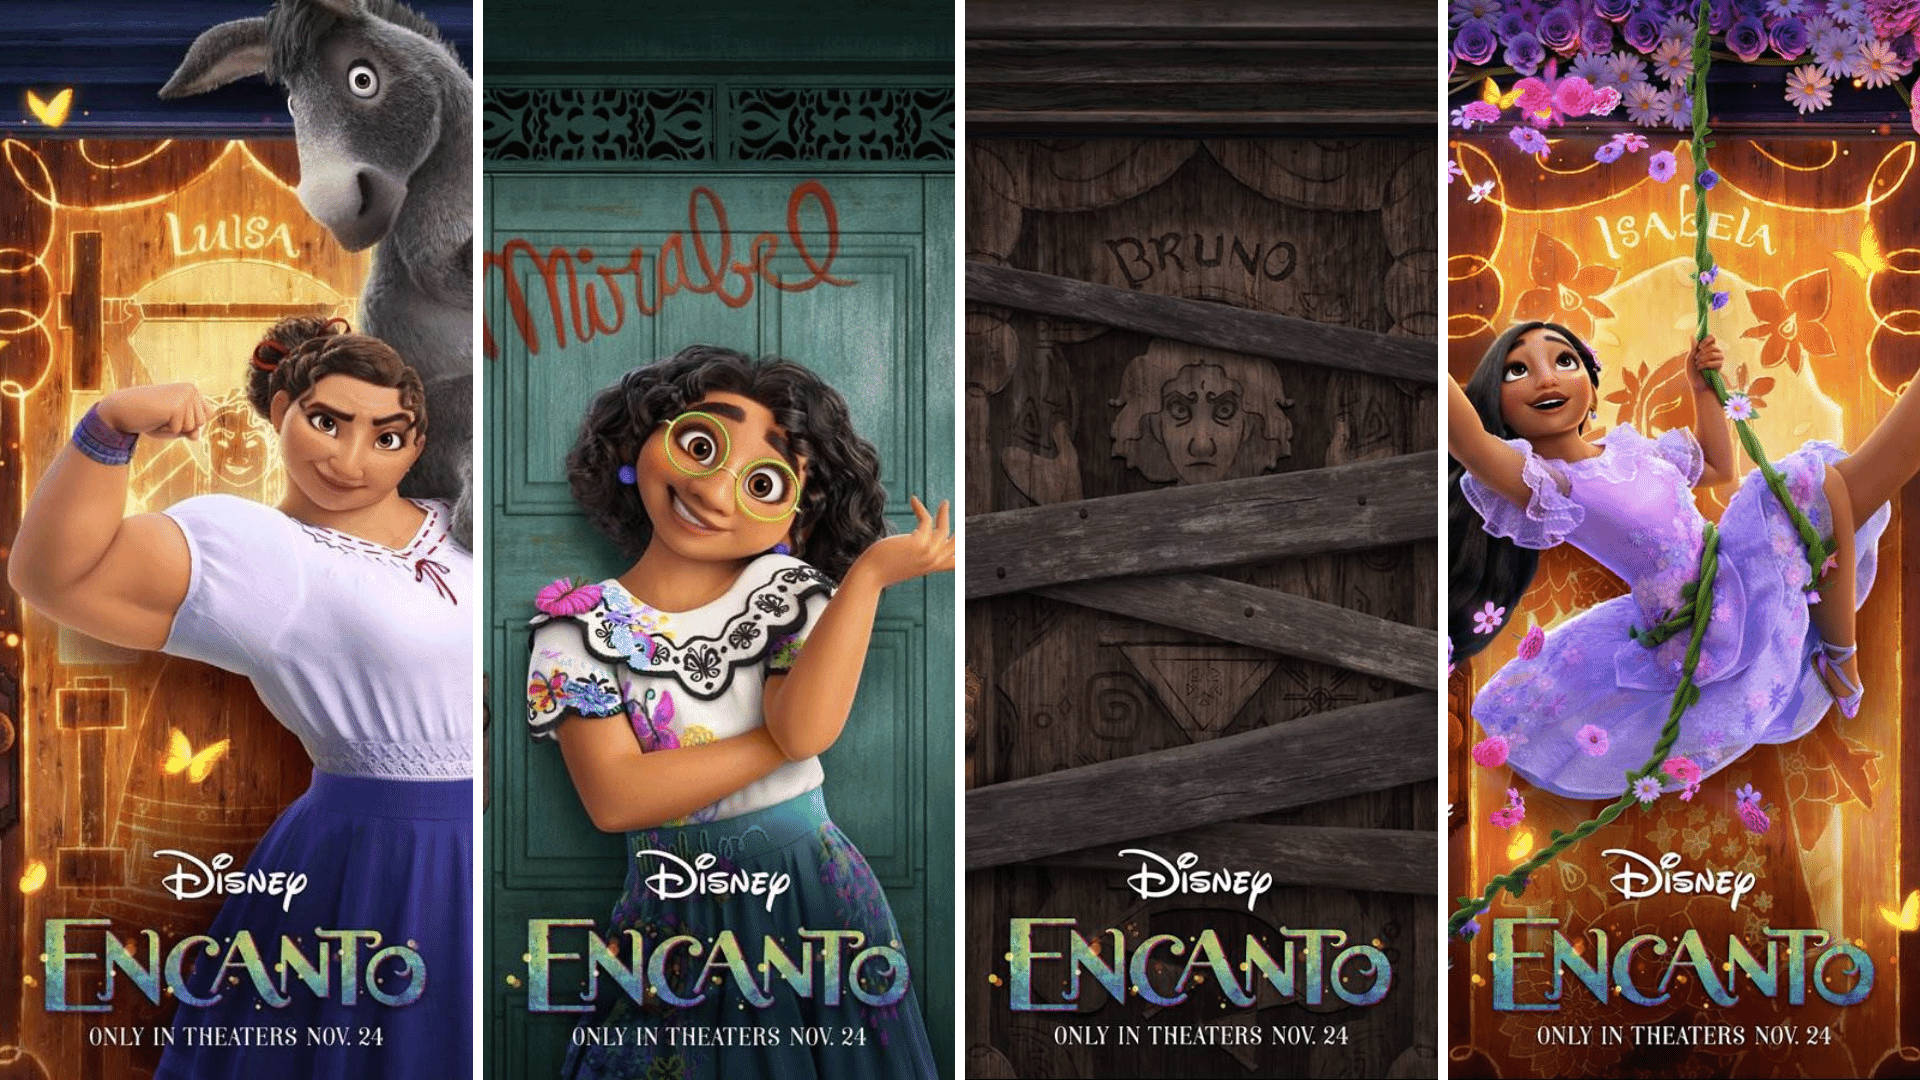 Download Disney Encanto Characters Collage Wallpaper